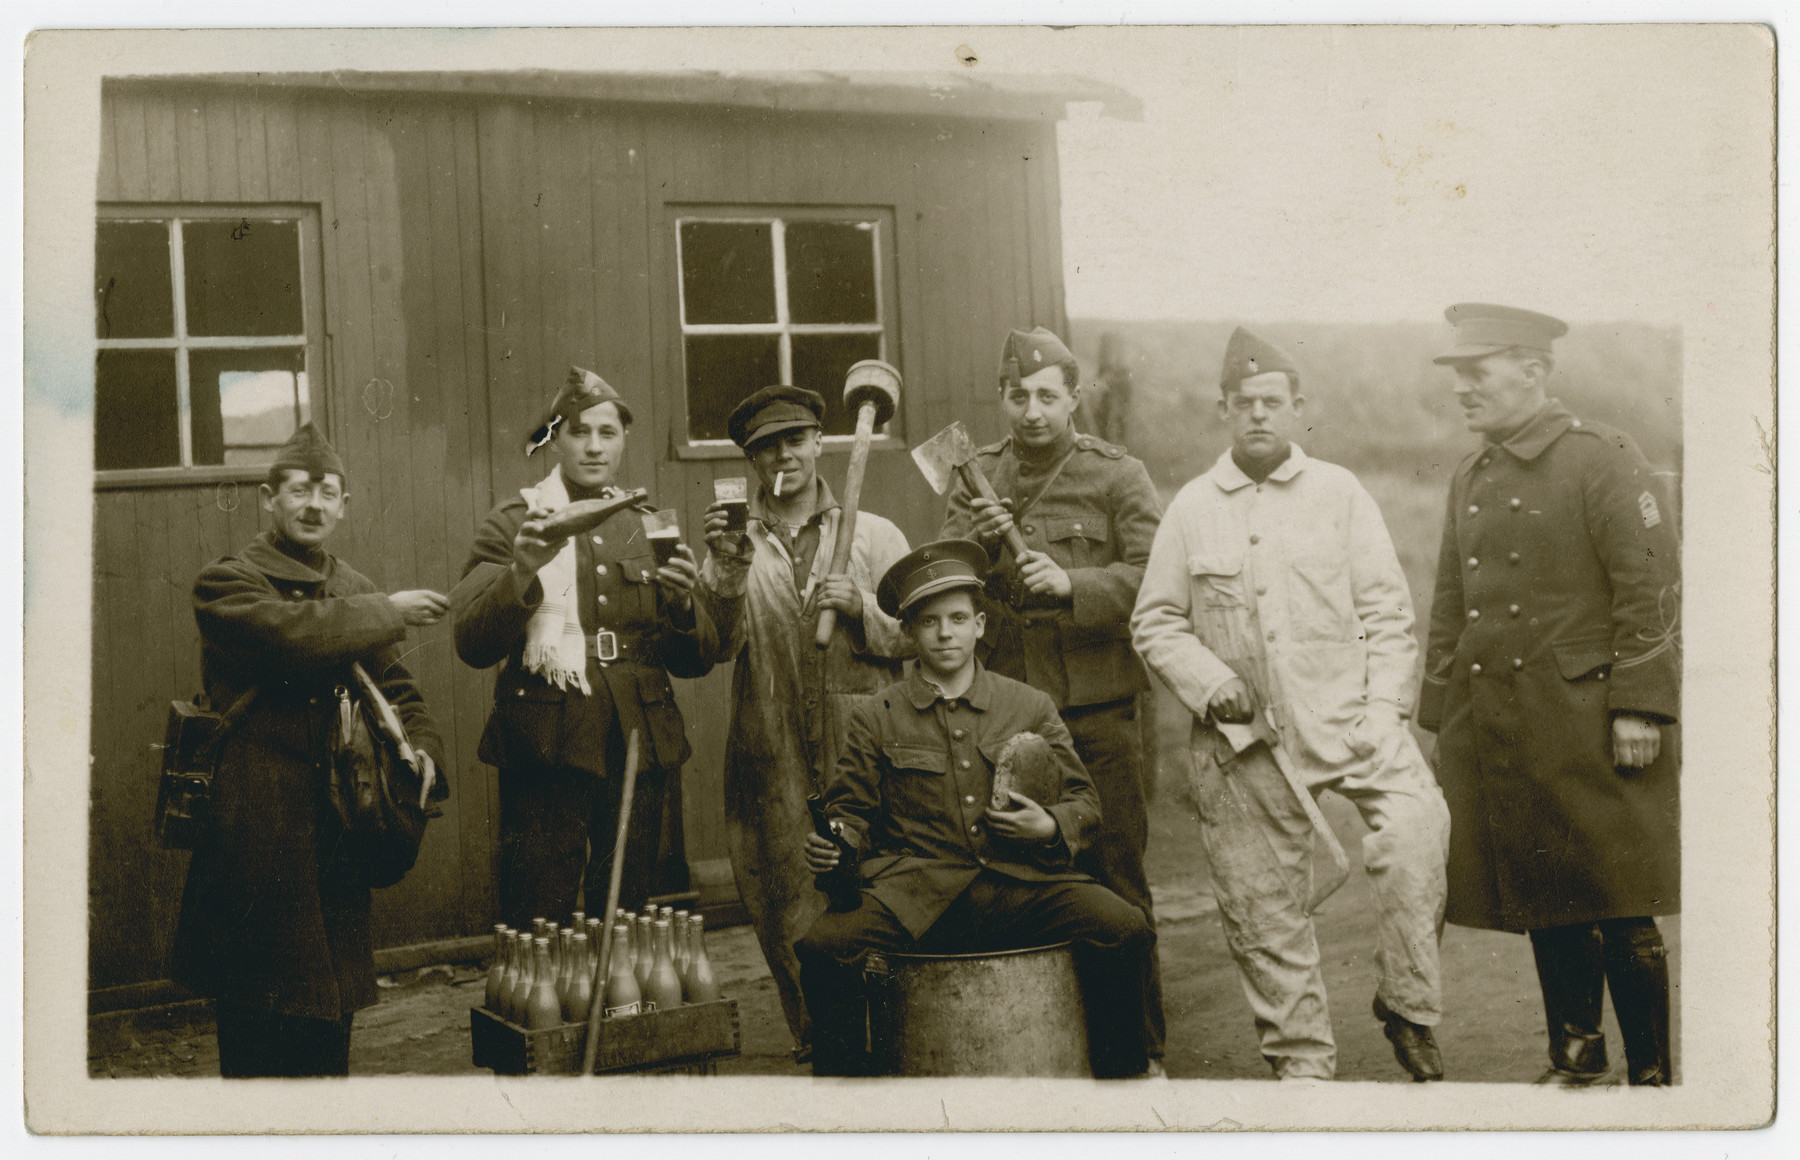 Belgian soldiers enjoy a case of beer.

Leopold Guttman is standing third from the right with an axe.

[Note: The photograph was with other Stalag 10C photos but from the activity it is likely that this photograph may be prewar.]